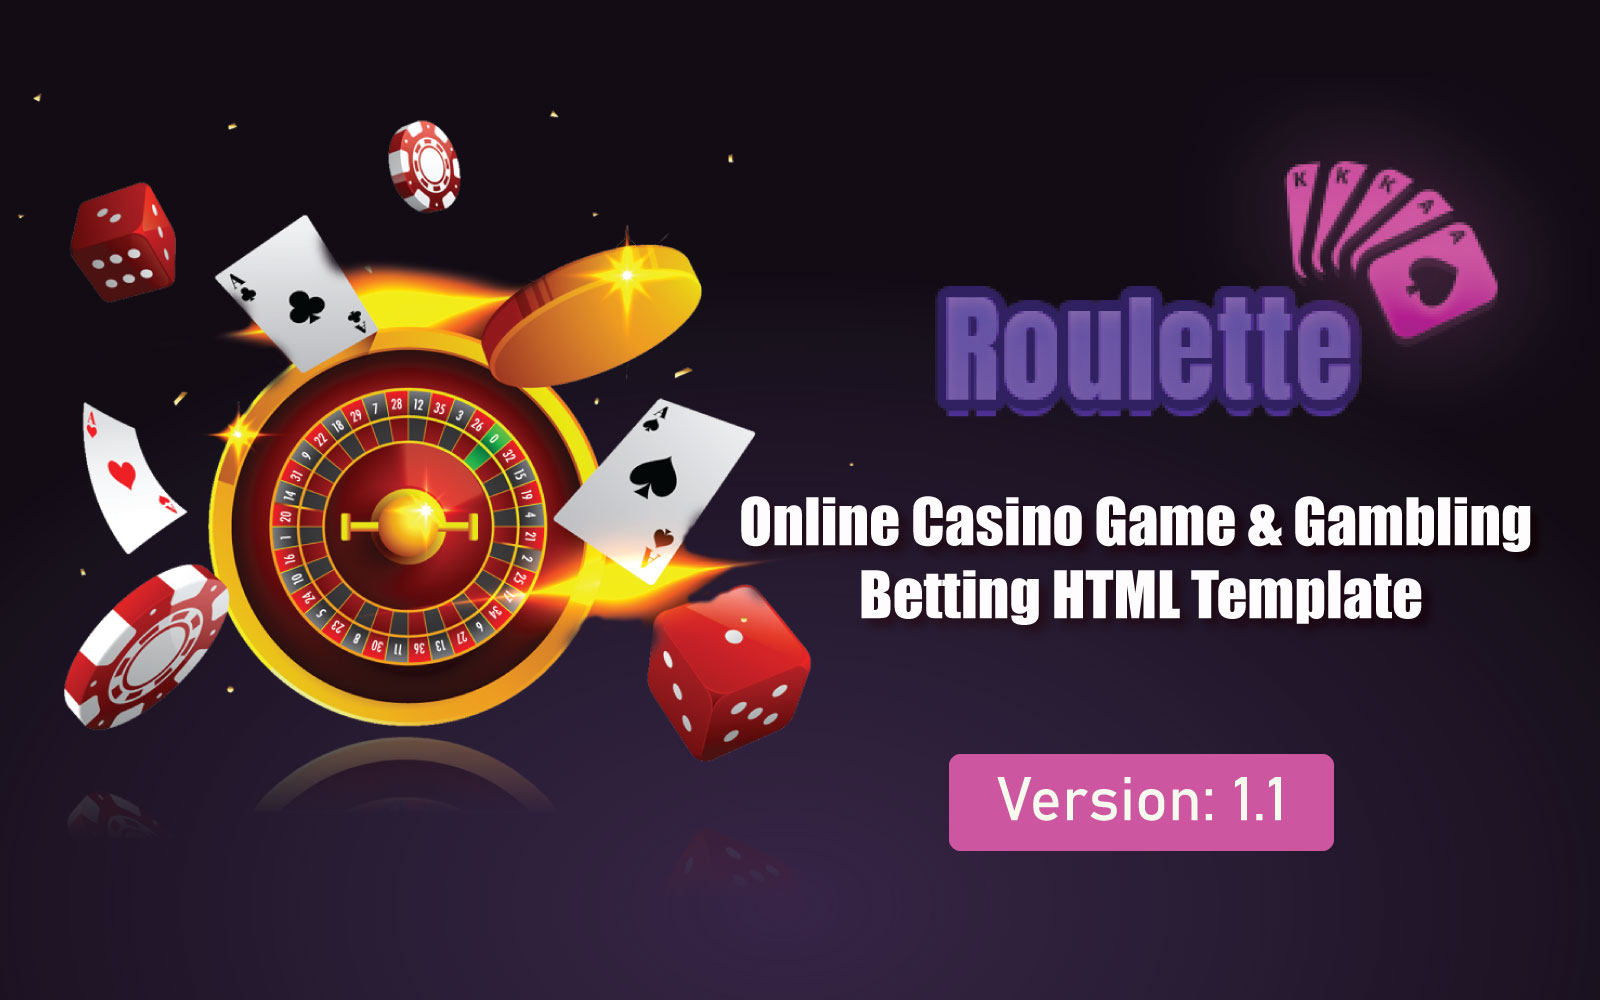 Roulette - is Online Casino Game & Gambling Betting HTML Website Template